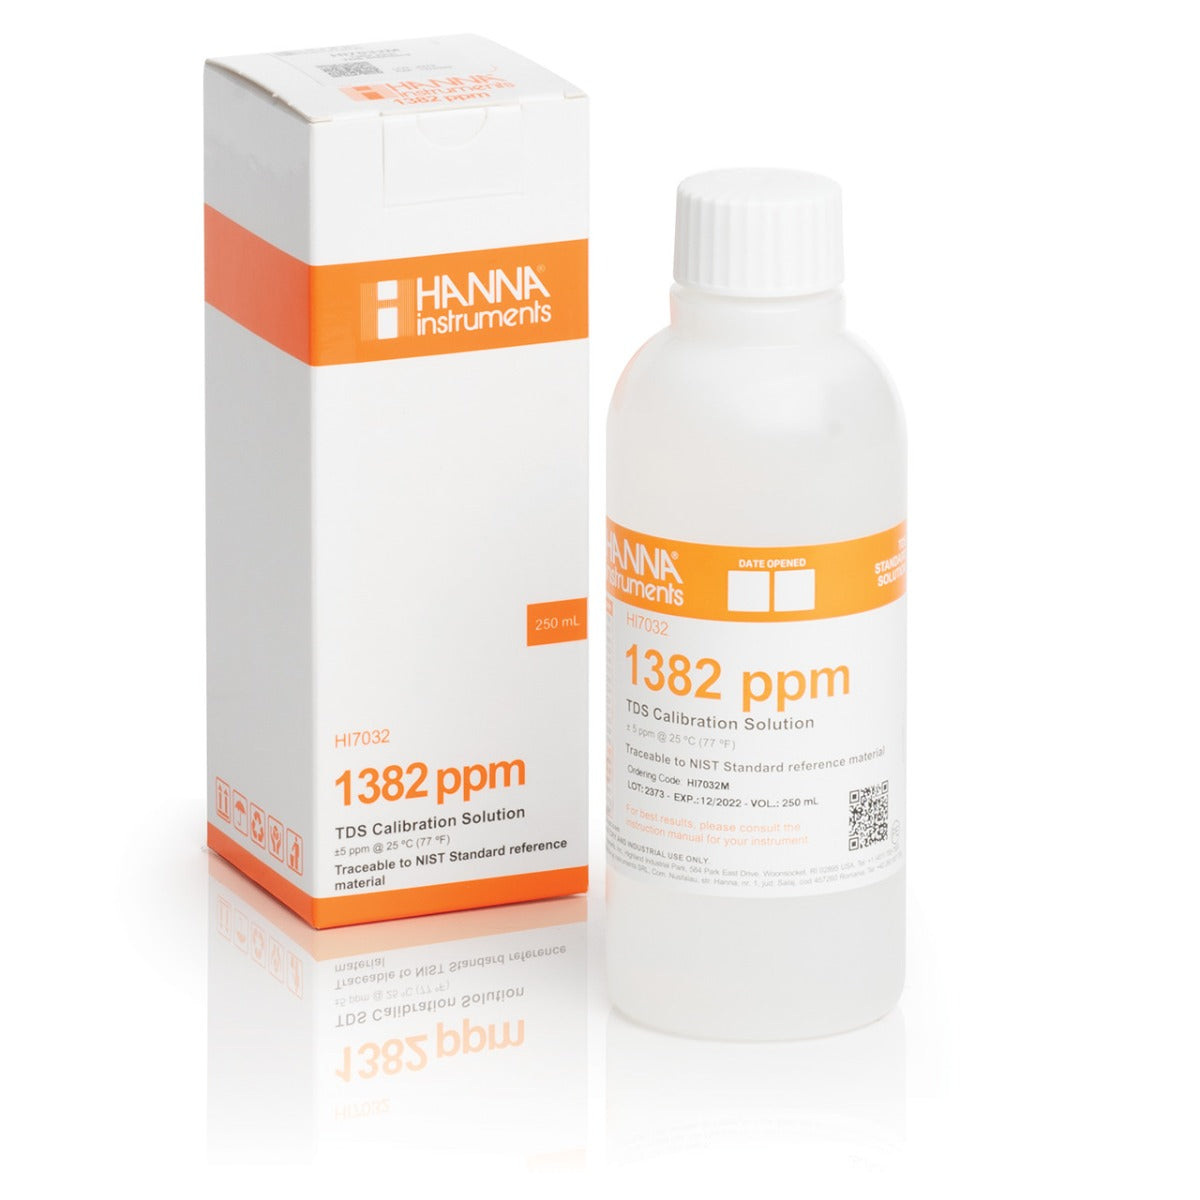 Product Image:Hanna Instruments 1382 ppm TDS Calibration Solution (500ml)